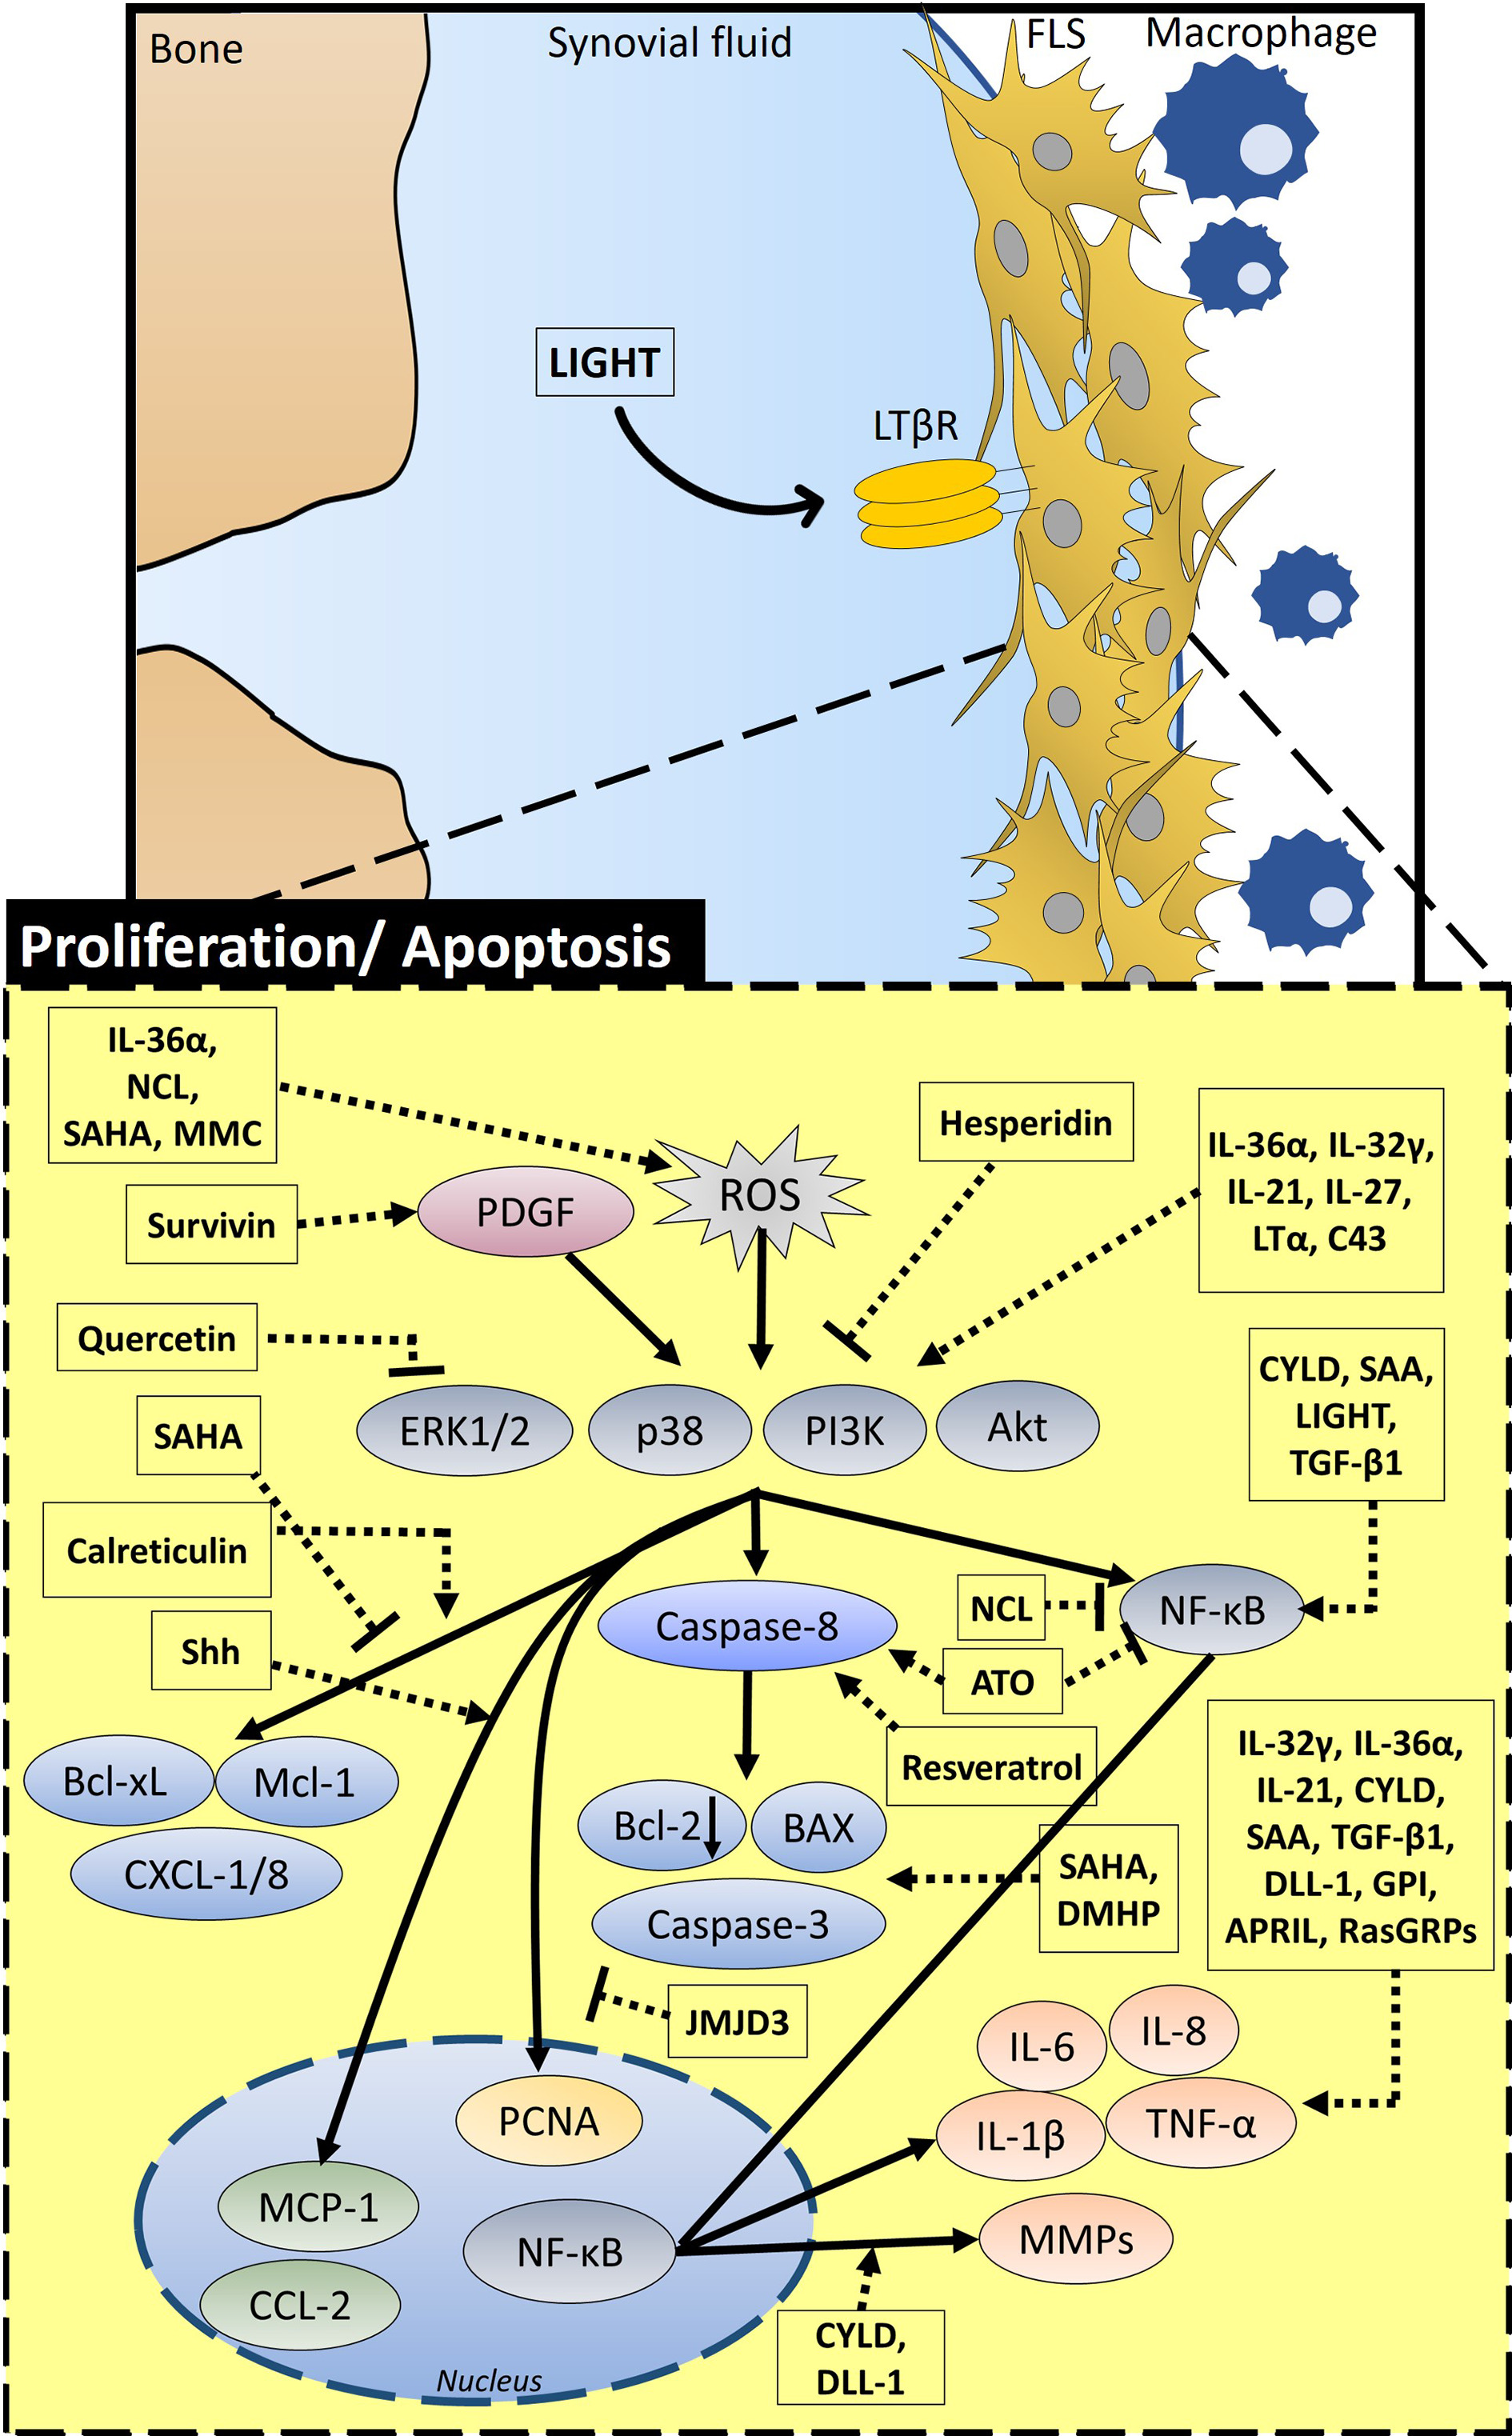 Fig. 1 
          Schematic diagram of the overall signalling mechanism and related factors of proliferative and apoptotic modulation in the fibroblastic synoviocytes (FLS) of rheumatoid arthritis (RA). Proliferation and apoptosis in FLS are regulated by various signalling factors. IL-36α, NCL, SAHA, and MMC increase reactive oxygen species (ROS) and survivin activates platelet-derived growth factor (PDGF) signalling. PDGF and ROS affect extracellular signal‑regulated protein kinase 1/2 (ERK1/2), p38, phosphoinositide 3-kinase (PI3K), and protein kinase B (Akt) signalling. SAHA inhibits B-cell lymphoma-extra large (Bcl-xL) and myeloid cell leukemia-1 (Mcl-1) expression. NCL inhibits nuclear factor kappa-B (NF-κB). Quercetin and hesperidin inhibit extracellular signal-regulated kinase (ERK)/PI3K/Akt signalling, whereas IL-36α, IL-32γ, IL-21, IL-27, LTα, and C43 activate this signalling. While calreticulin stimulates Bcl-xL, Mcl-1, and C-X-C motif chemokine ligand (CXCL)-1/8 through this signalling, ATO and resveratrol enhance caspase-8 activity, and CYLD, SAA, LIGHT, and TGF-β1 activate NF-κB signalling. In the nucleus, Shh activates MCP-1 and CYLD and DLL-1 increase MMPs and IL-1β through NF-κB signalling. GPI, APRIL, and RasGRPs increase inflammatory factors such as TNF-α and IL-8. JMJD3 inhibits the activity of PCNA in the nucleus. SAHA and DMHP enhance expression of Bcl-2-associated X protein (BAX) and caspase-3, and they also attenuate Bcl-2 expression. LIGHT, lymphotoxin-like, herpes simplex virus glycoprotein D, a receptor expressed by T lymphocytes; LTα, lymphotoxin α; APRIL, a proliferation-inducing ligand; Shh, Sonic hedgehog; GPI, glucose-6-phosphate isomerase; IL, interleukin; JMJD3, Jumonji C family of histone demethylases; CYLD, cylindromatosis; RasGRPs, Ras guanine nucleotide-releasing proteins; TGF-β1, transforming growth factor-β1; SAA, serum amyloid A; DLL-1, δ like Notch ligand 1; C43, compound 43; ATO, arsenic trioxide; DMHP, 7,3'-dimethoxy hesperetin; NCL, niclosamide; MMC, mitomycin C; MCP-1, monocyte chemoattractant protein-1; SAHA, suberoylanilide hydroxamic acid; PCNA, proliferating cell nuclear antigen.
        